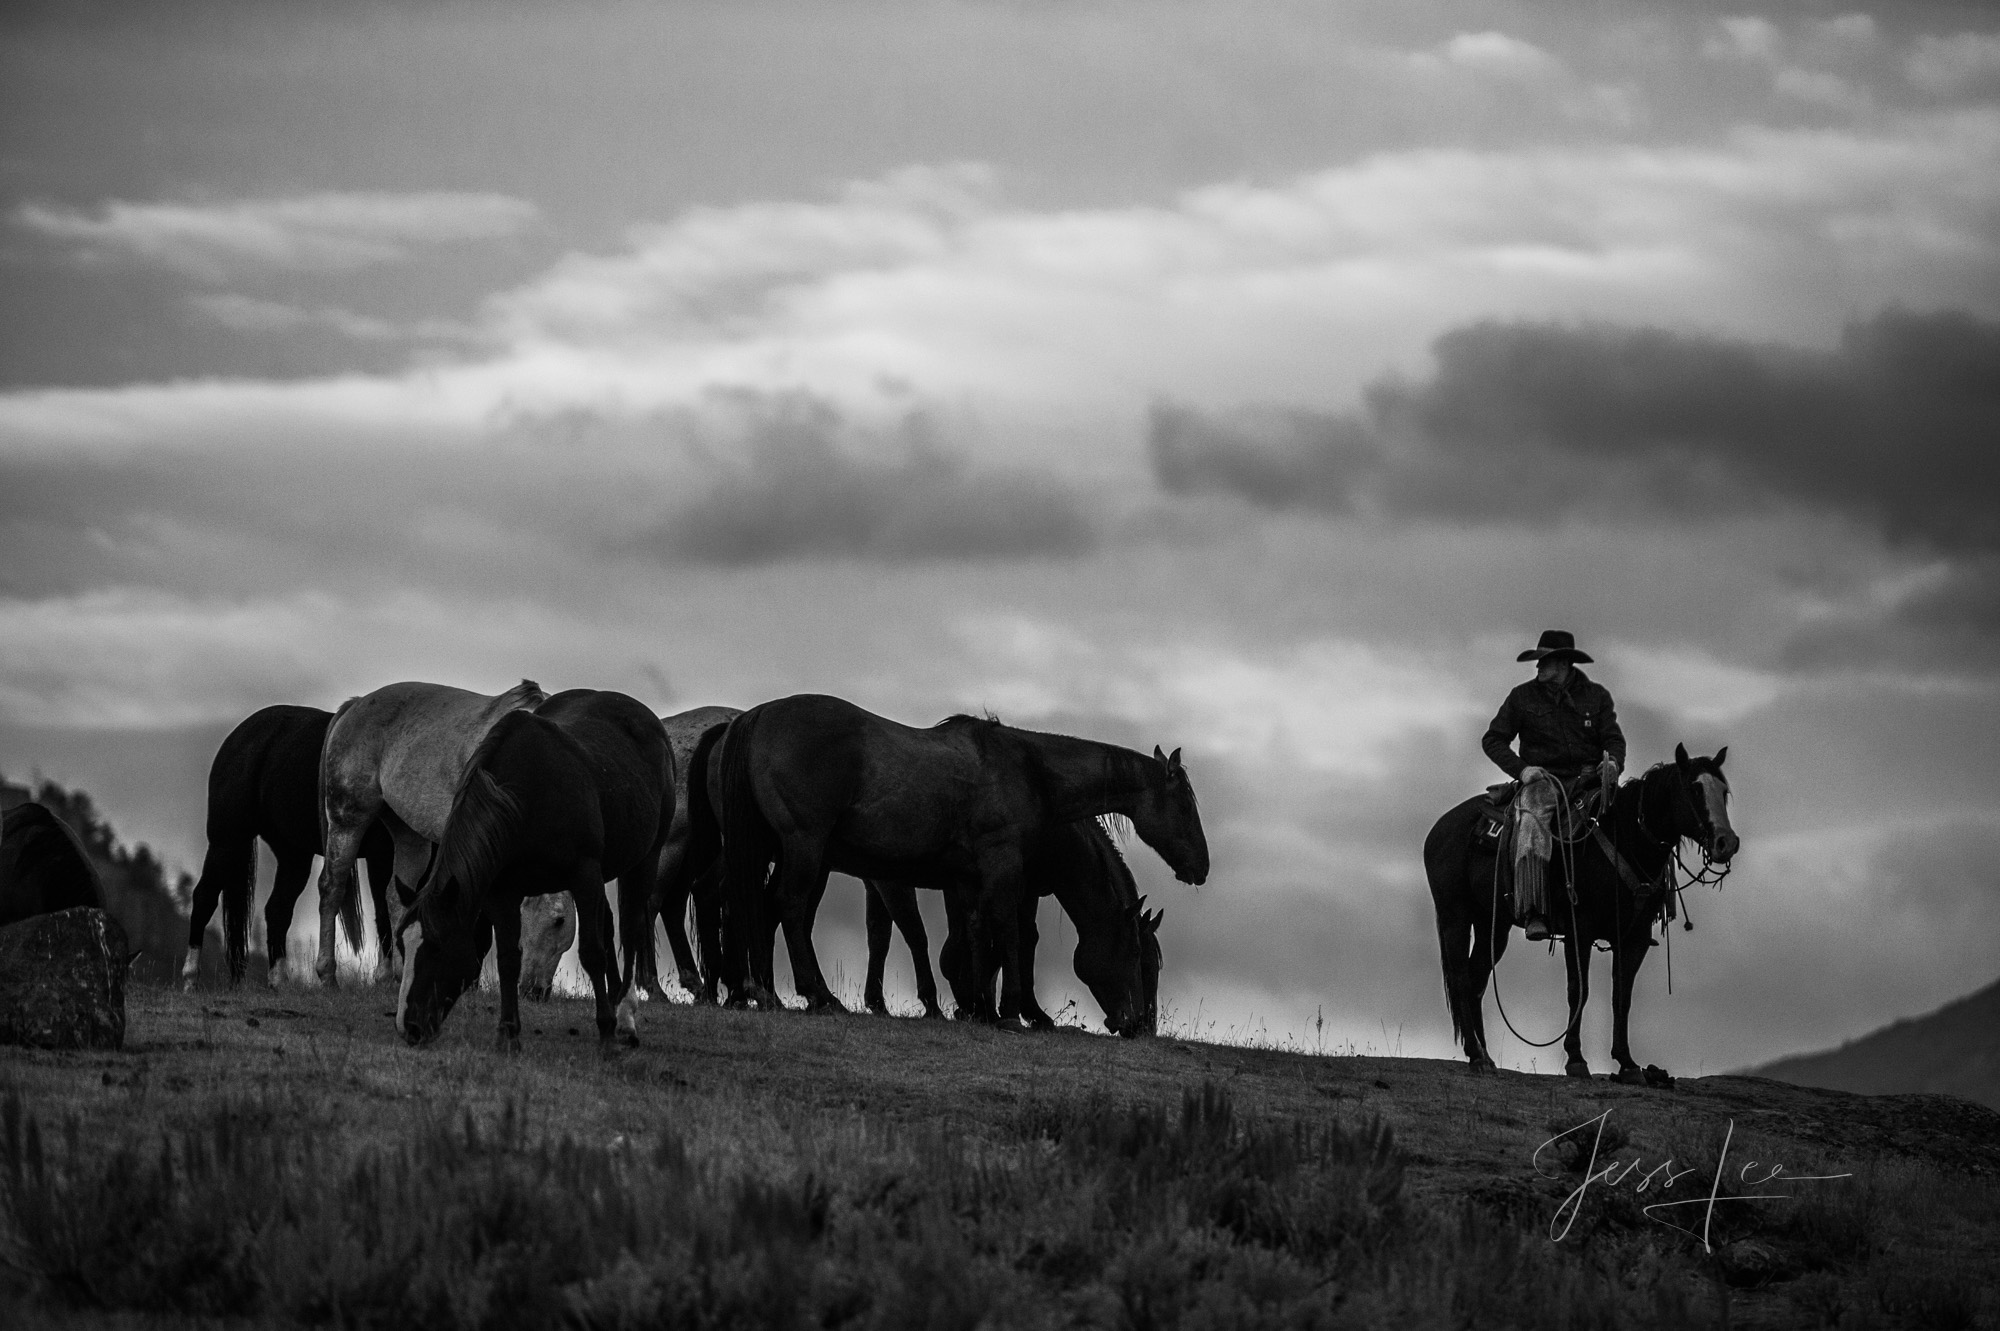 Fine Art Limited Edition Photo Prints of Cowboys, Horses, and life in the West. Watching the Herd is a Cowboy picture in black...